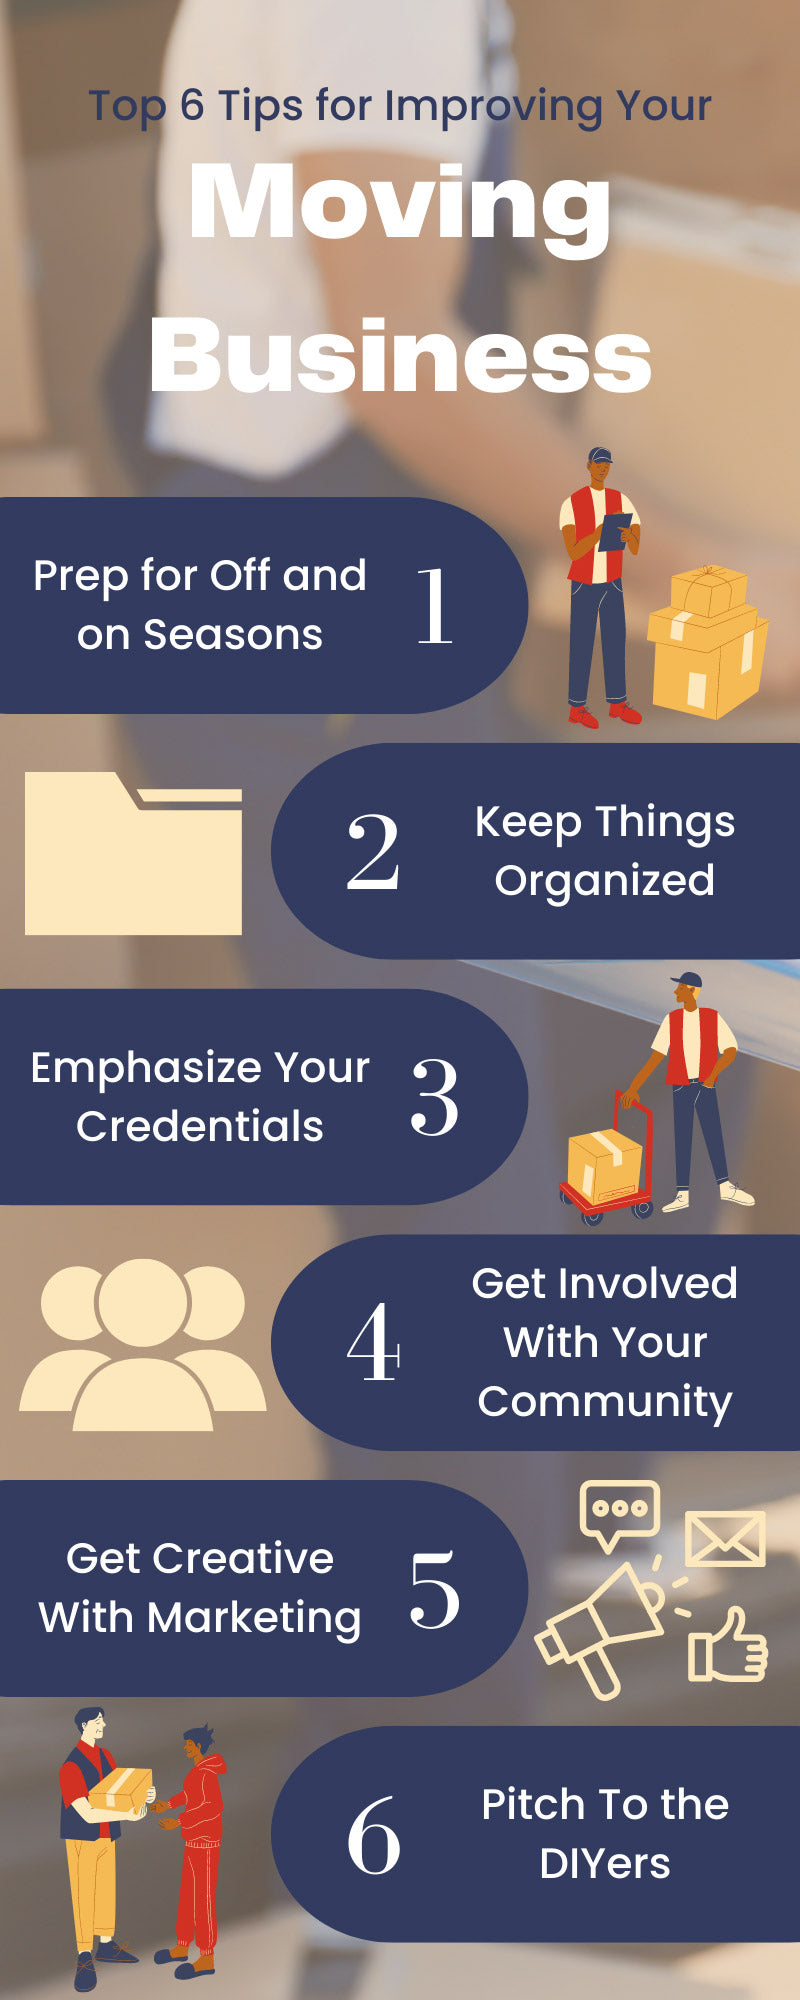 Top 6 Tips for Improving Your Moving Business